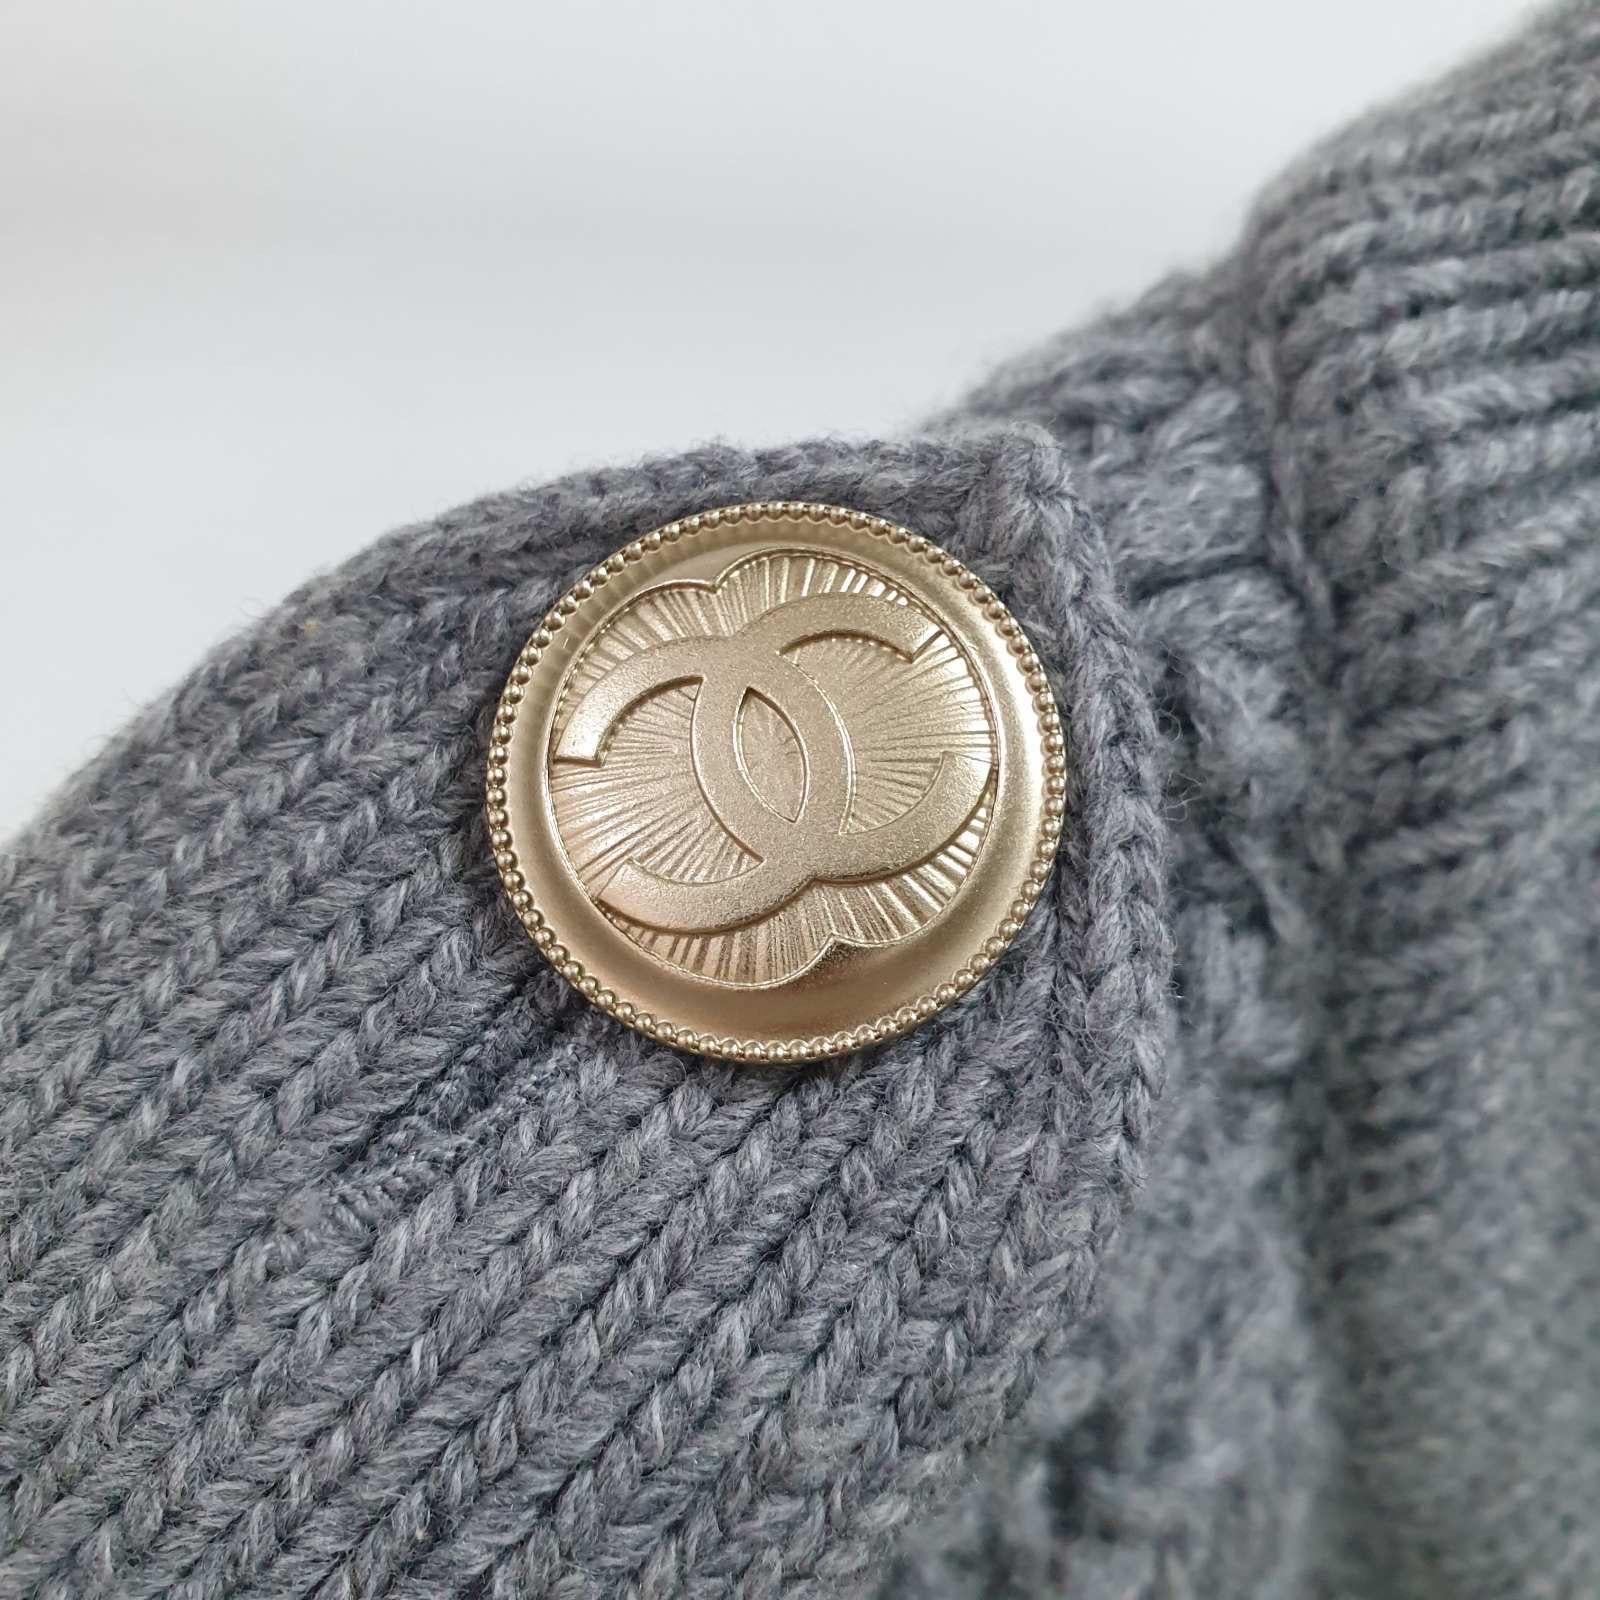 Chanel oversized chunky knit coat in a noble blueish grey colour shade.
Boutique price ca. 7,620$
- CC logo buttons
Sz.48

Excellent condition.